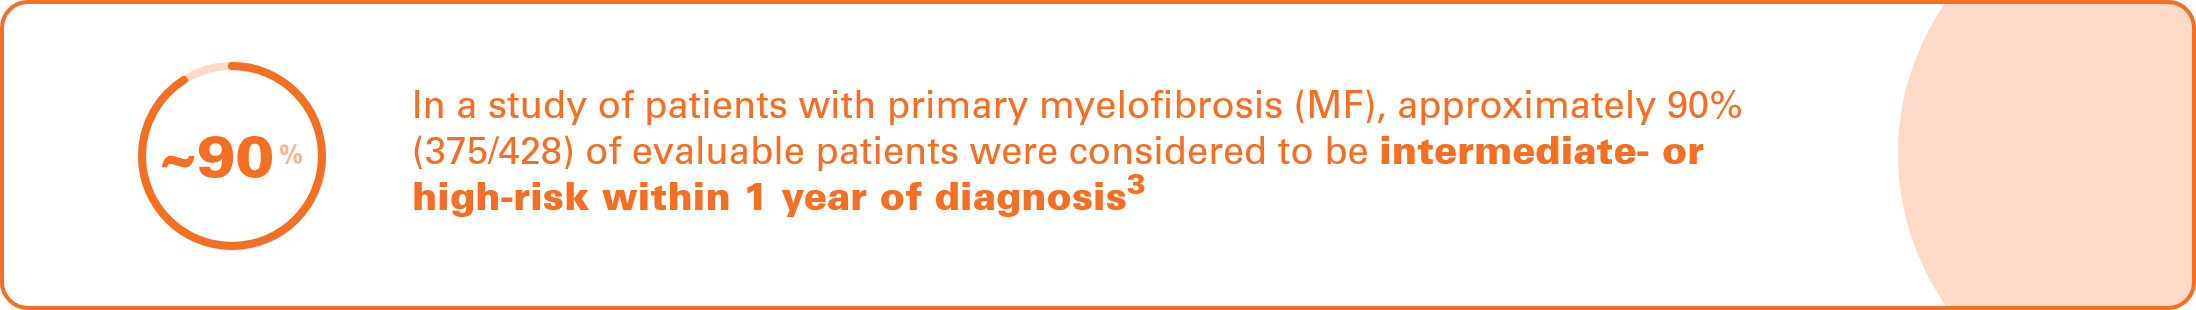 Image of text  that says In a study of patients with primary myelofibrosis (MF), approximately 90% (375/428) of evaluable patients were considered to be intermediate- or high-risk within 1 year of diagnosis